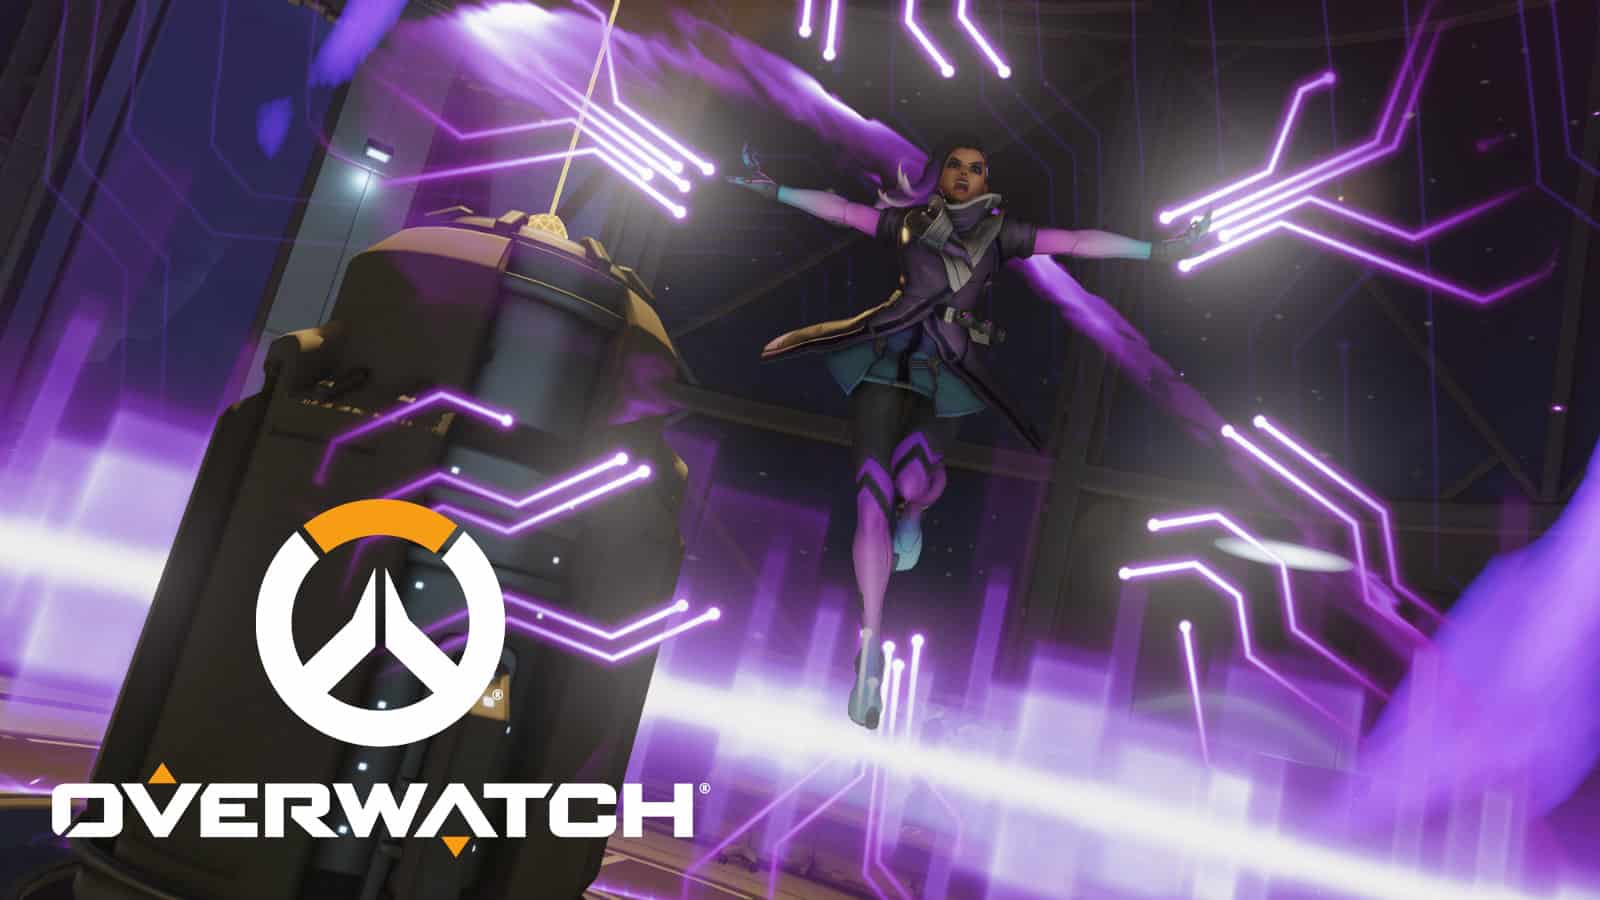 ankita sanghvi recommends overwatch squelch chat pic